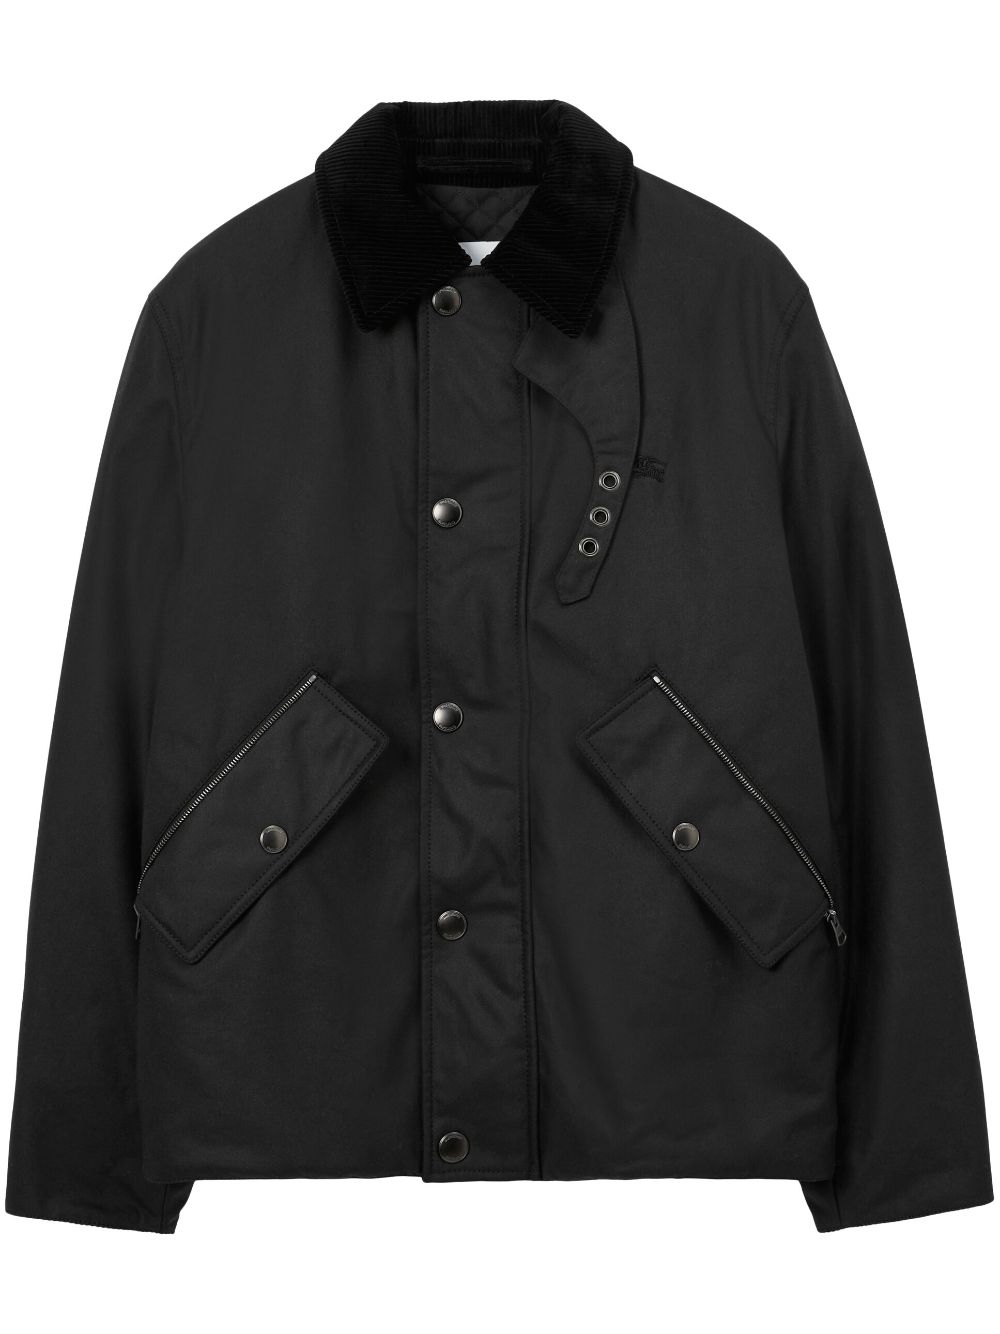 Burberry Equestrian Knight single-breasted jacket - Black